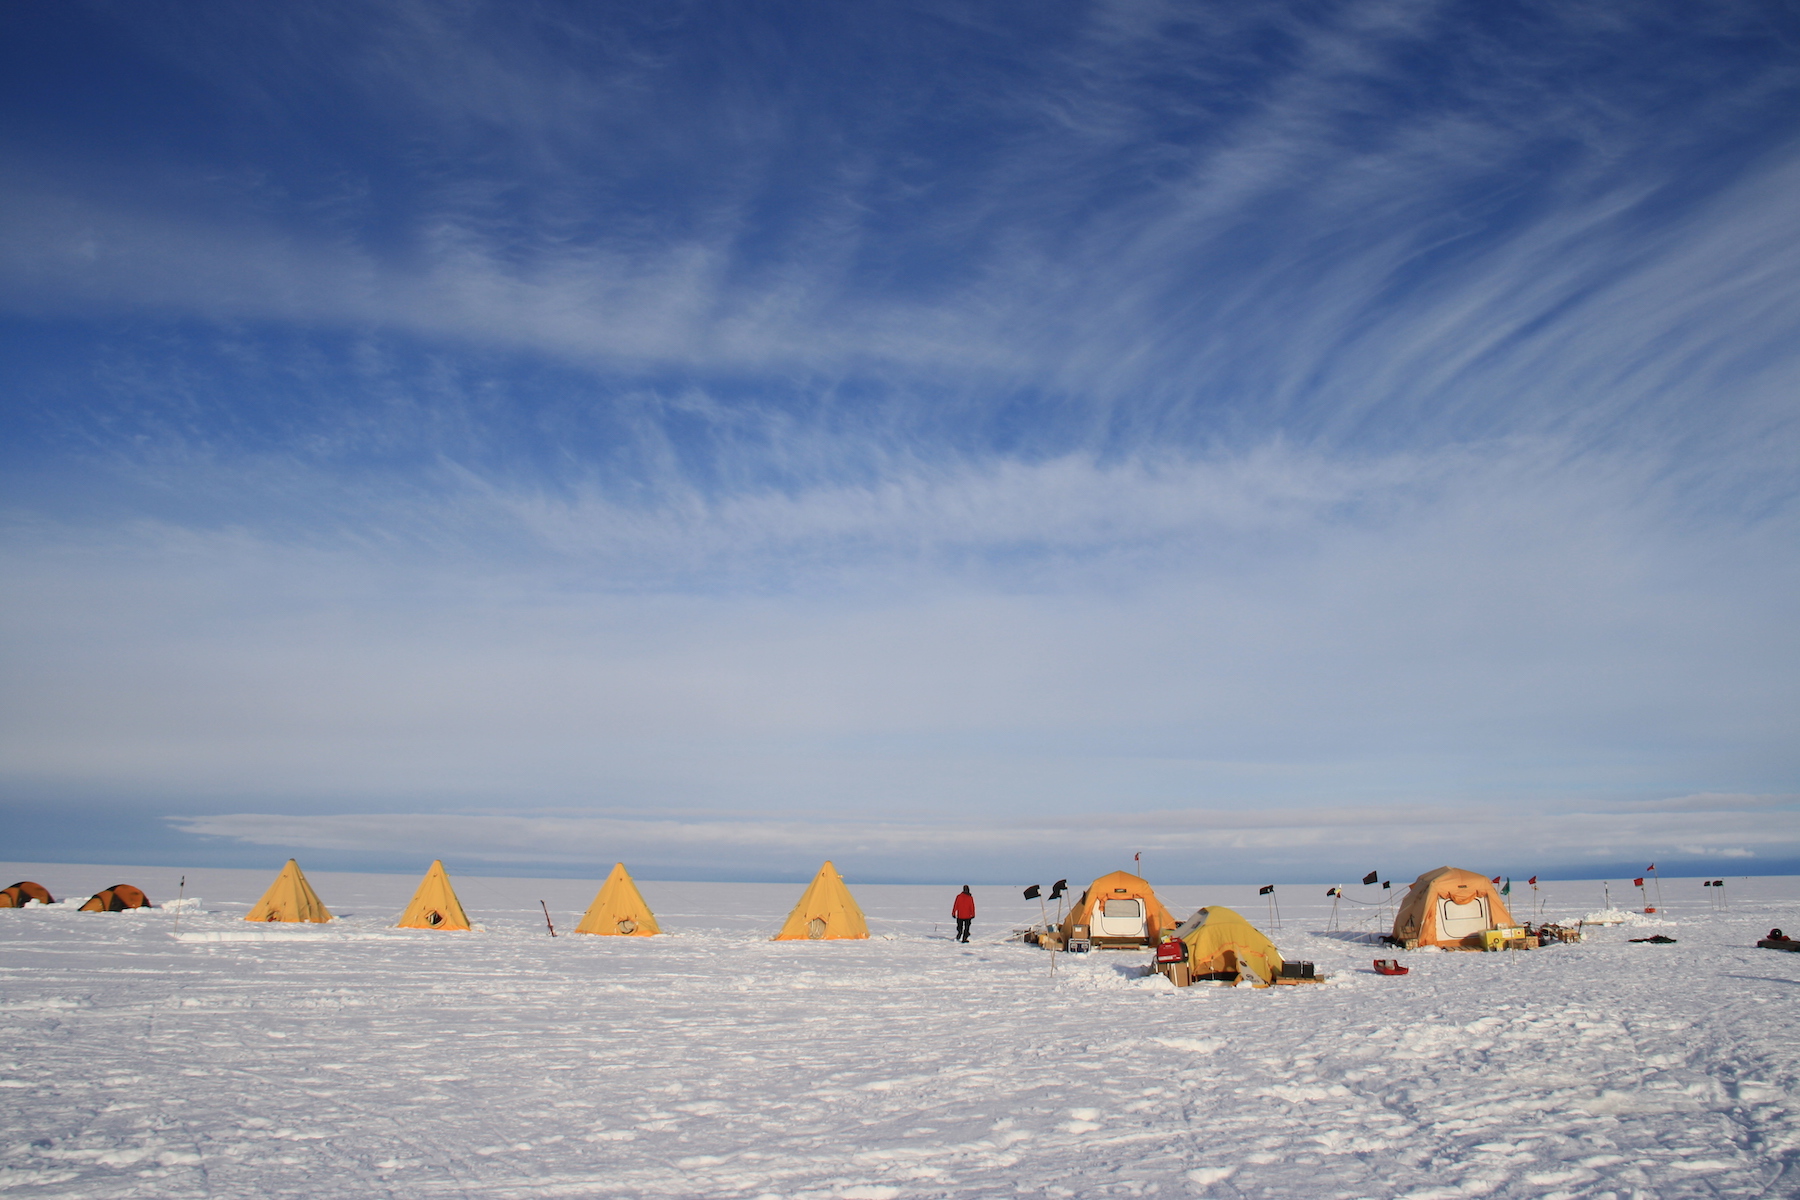 Cavity Camp on Thwaites Glacier. Photo credit: Ted Scambos